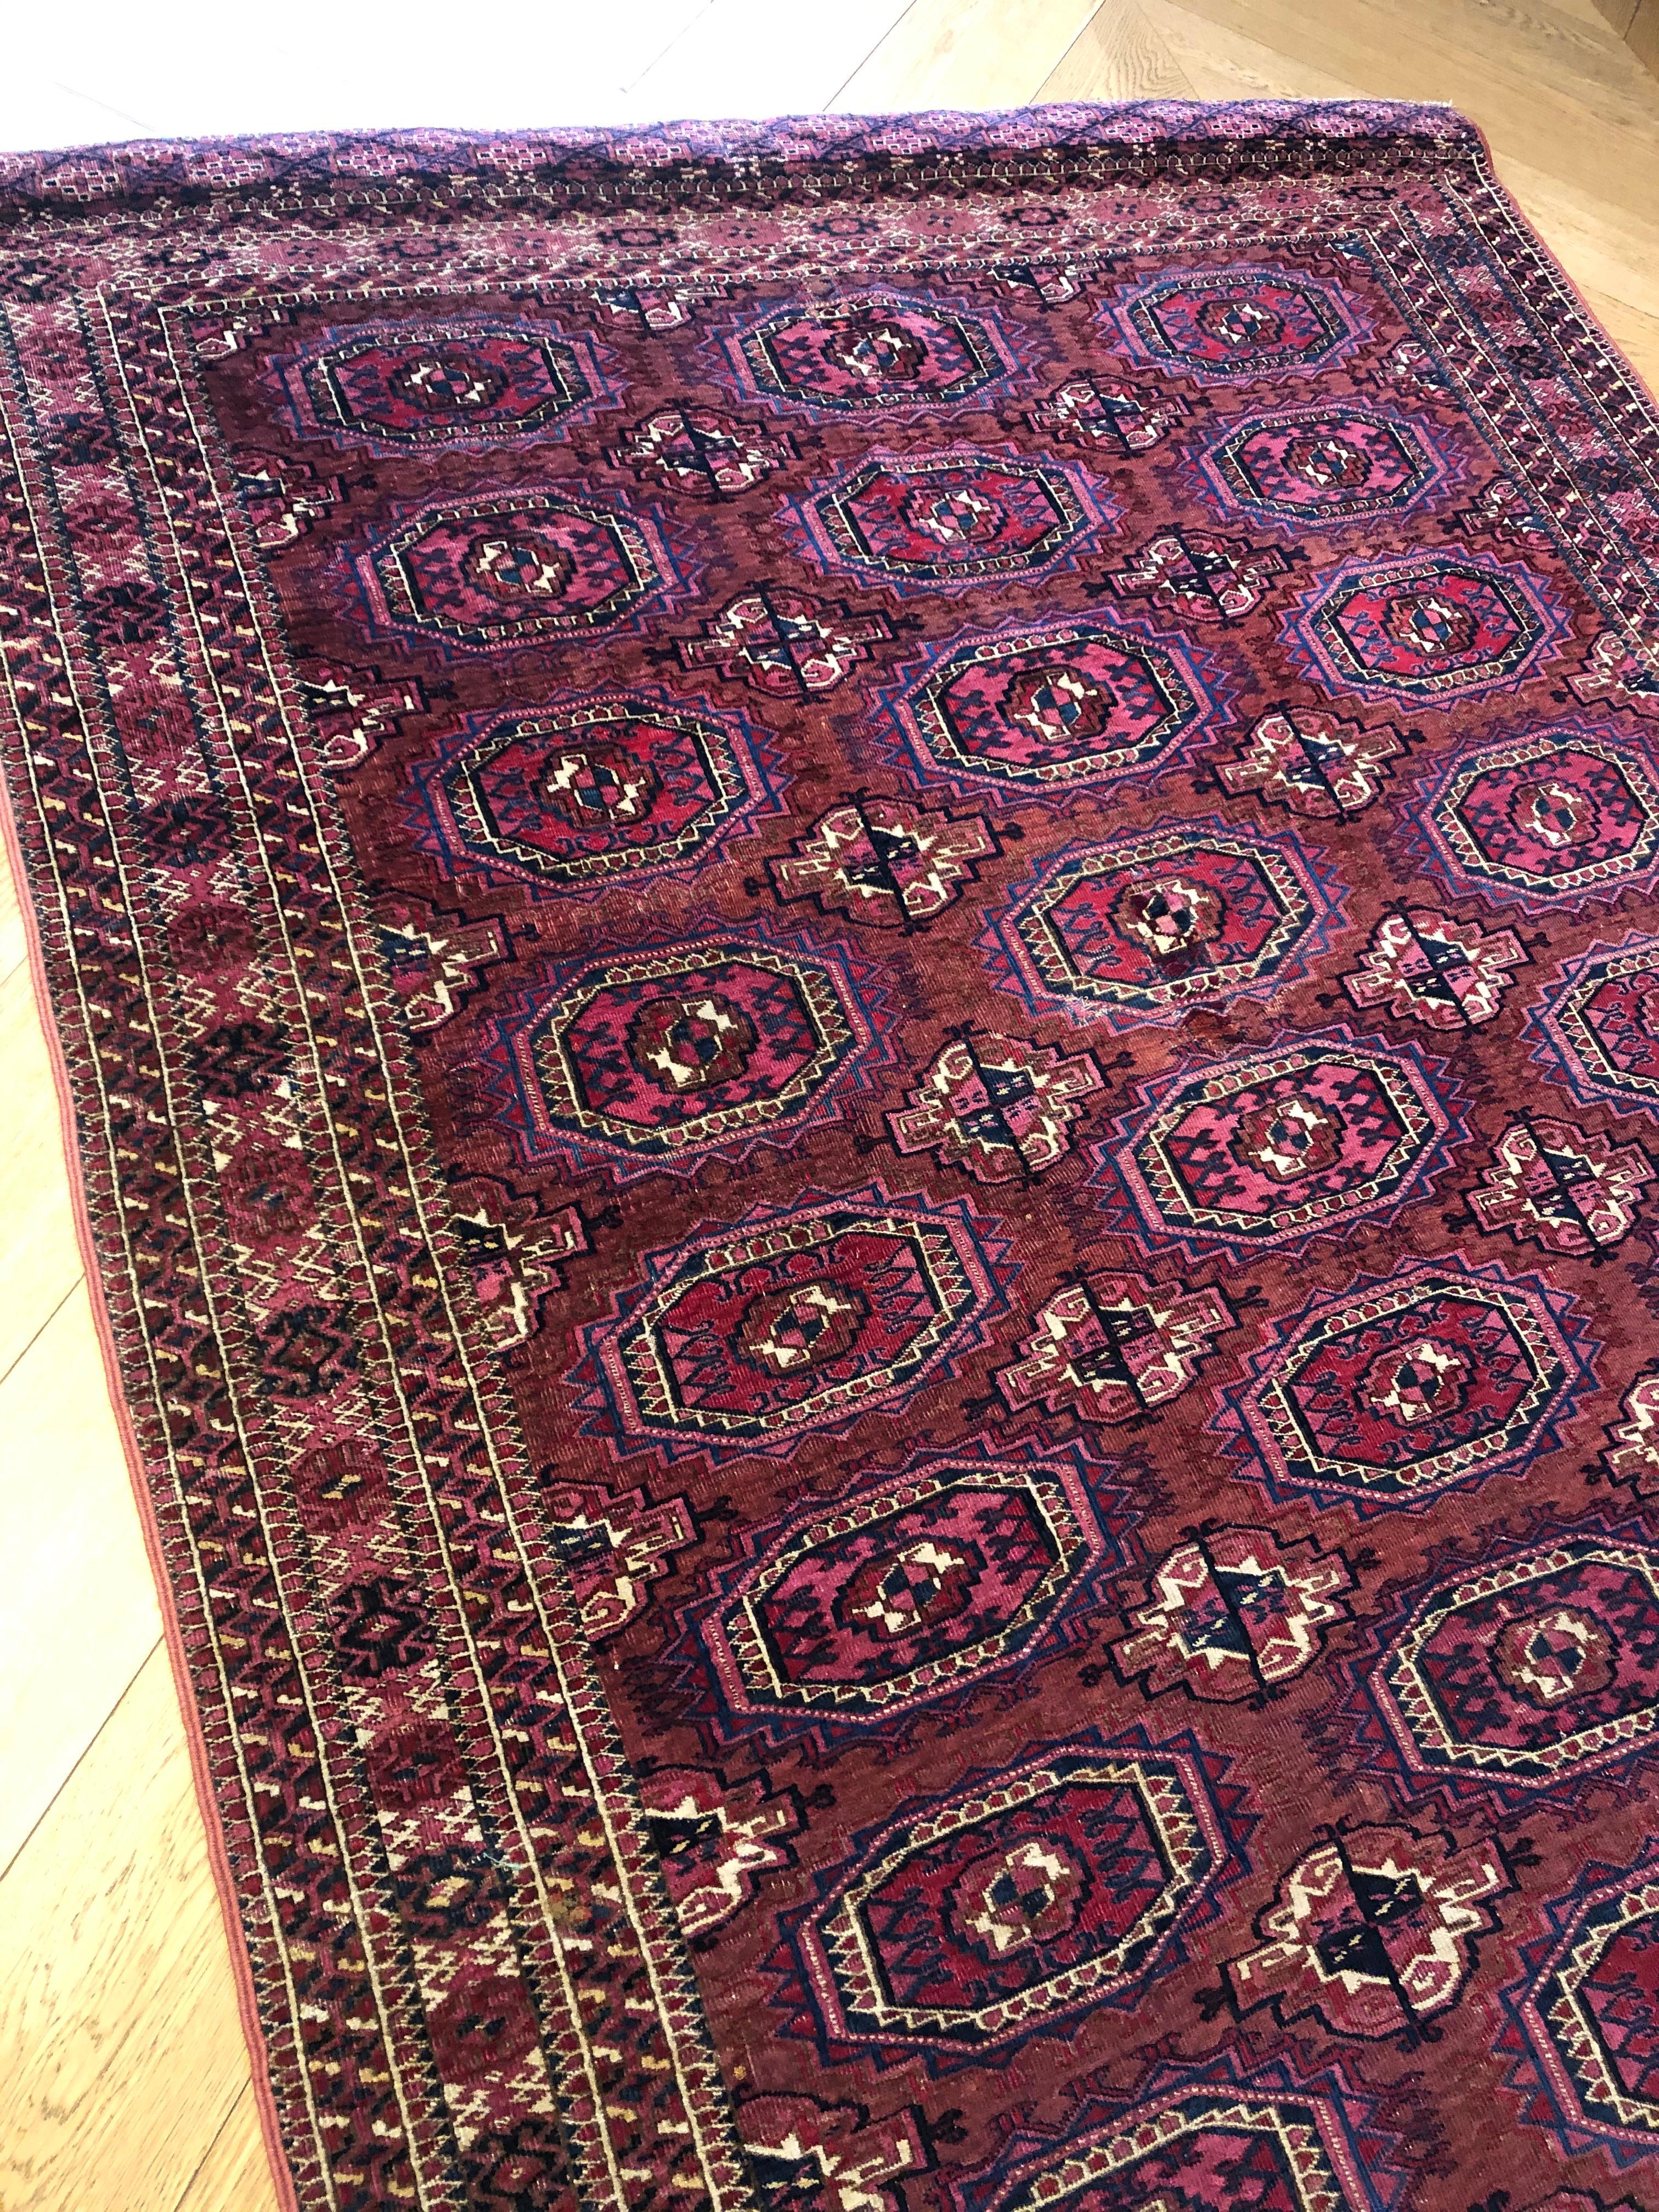 Hand-Knotted 19th Century Brilliant Red Symmetrical Gul Turkmenistan Antique Rug, ca 1890